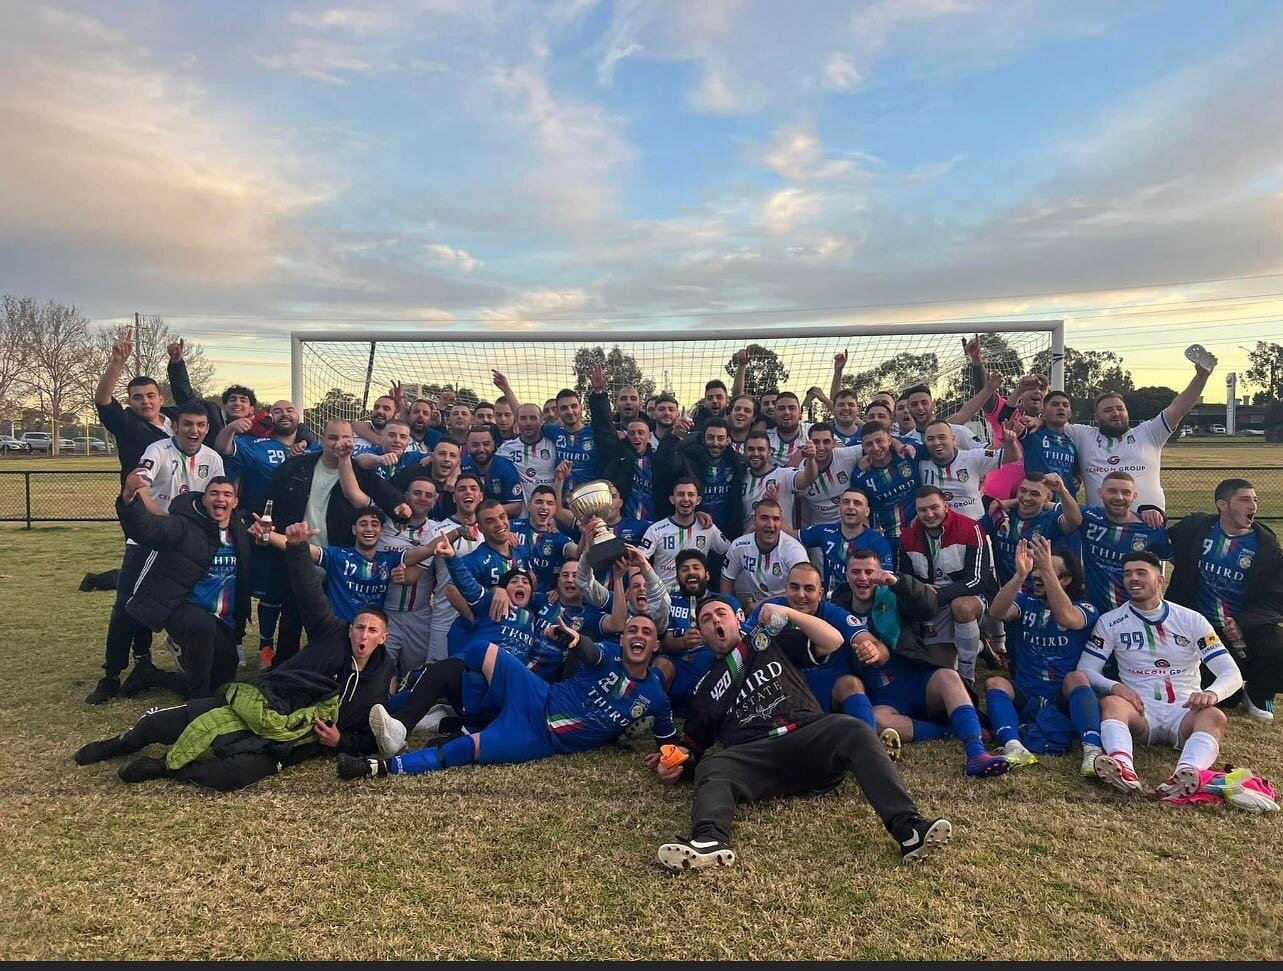 Are you ready for the greatest game of soccer you&rsquo;ve ever seen? Well  keep looking cause this is not it. 😂Come down to Bill Anderson Reserve Kemps Creek on Saturday the 1st of July to Watch Sydney/Canberra Vs Griffith battle it out for the Cal